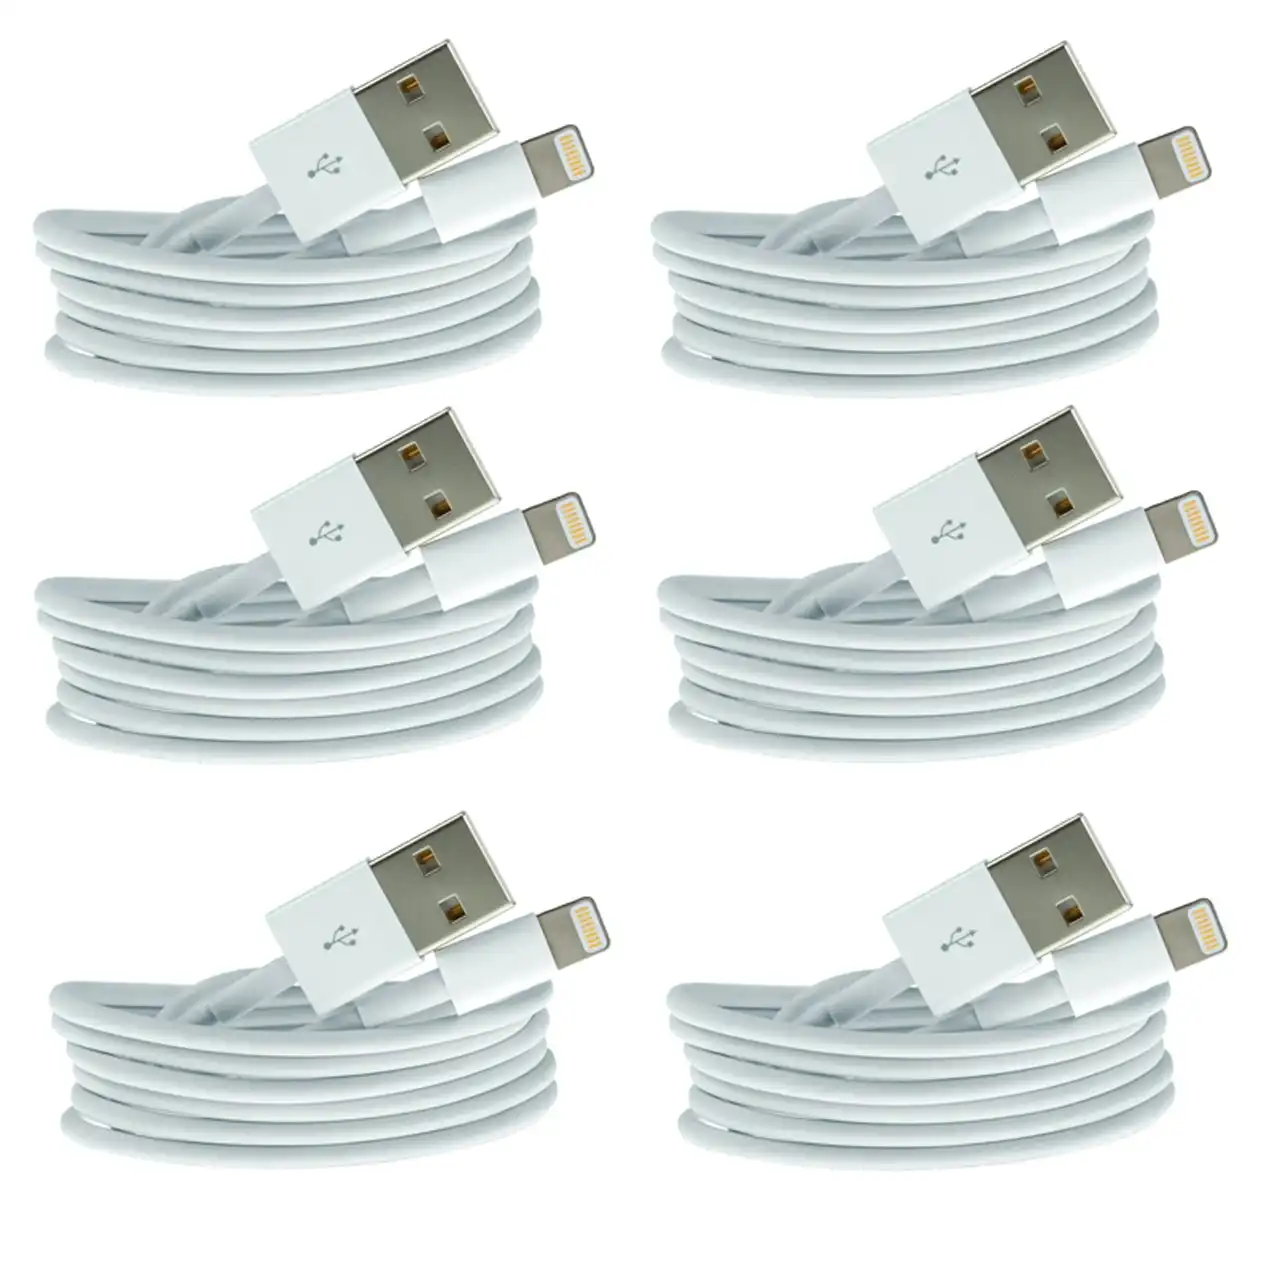 6 Pc 1M Usb Data Charge Cable Lightning Pin Connector For Apple Iphone Ipad 6X